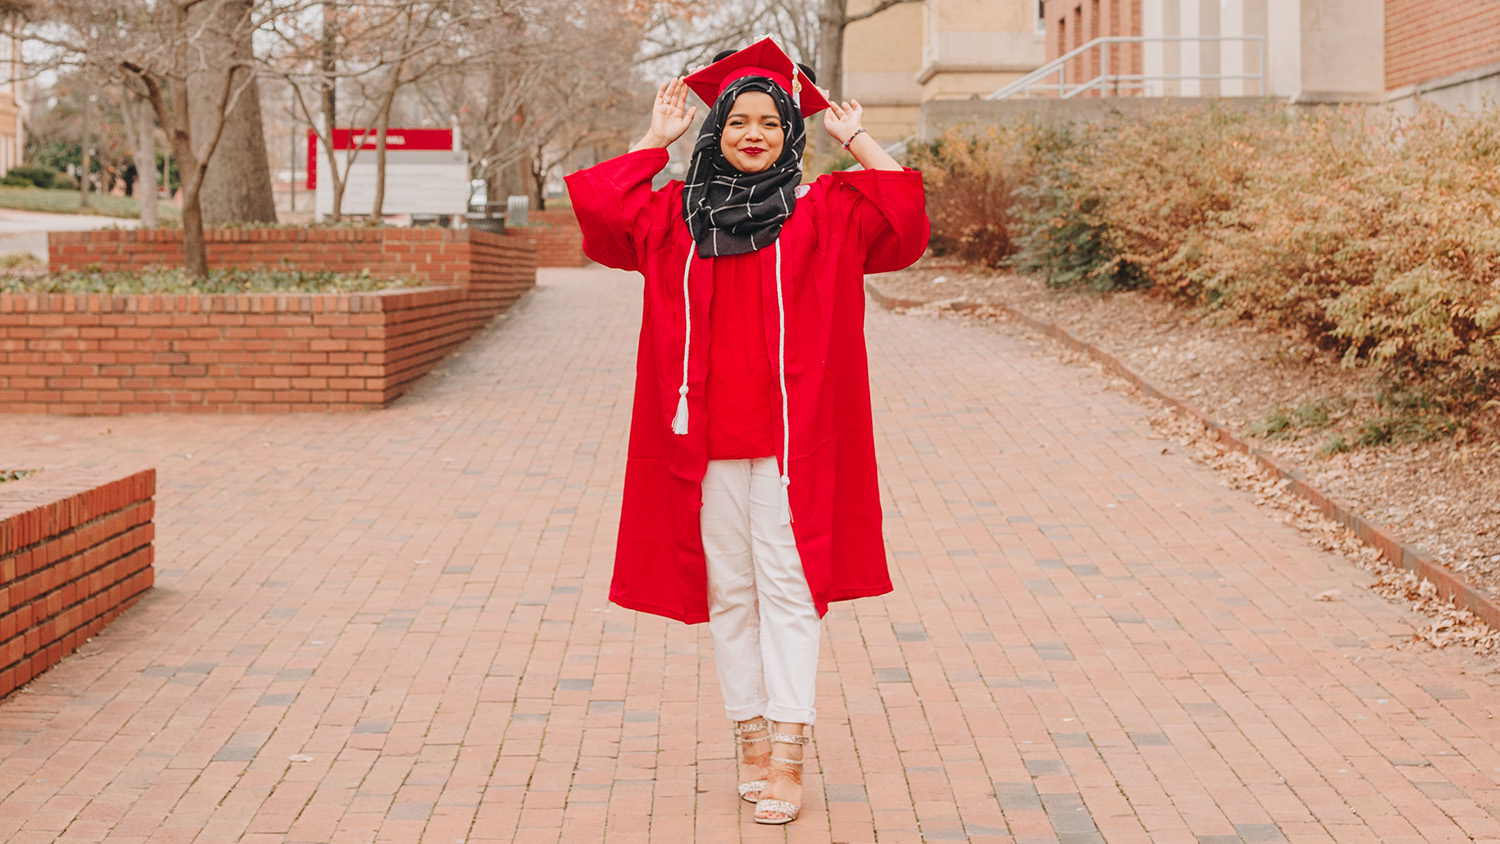 Wearing a red cap and gown, a student stands on a brick path